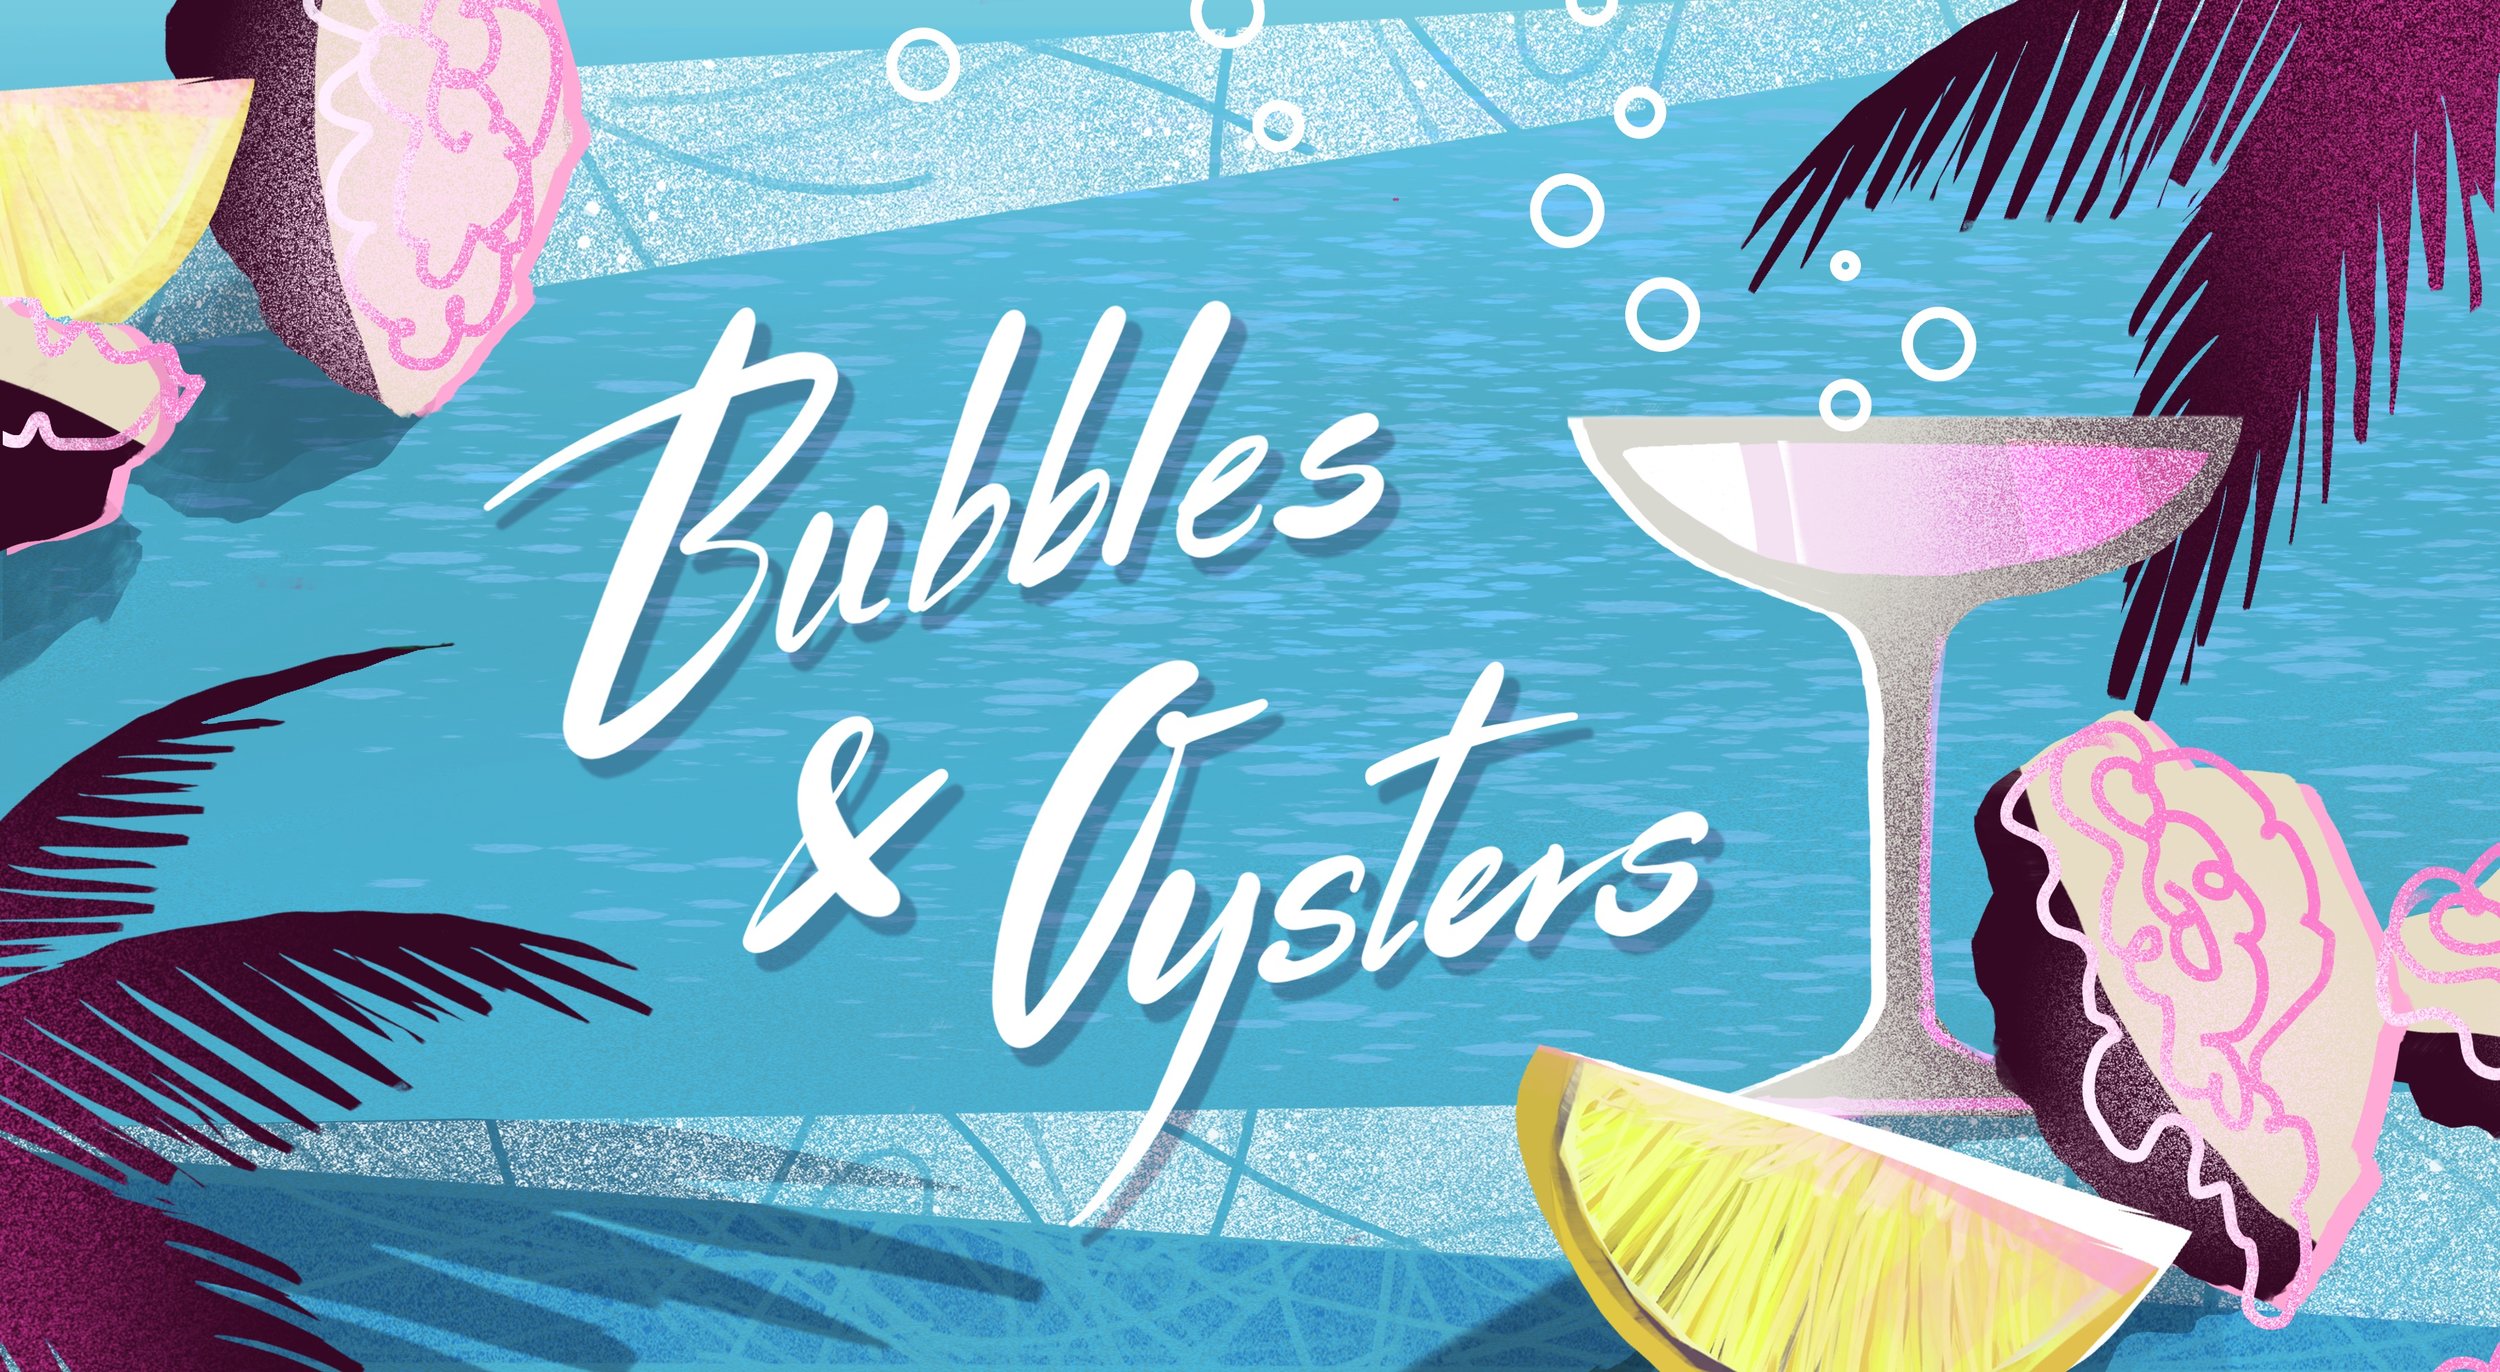 BubblesOysters_Facebook_Event_Cover (1).jpg